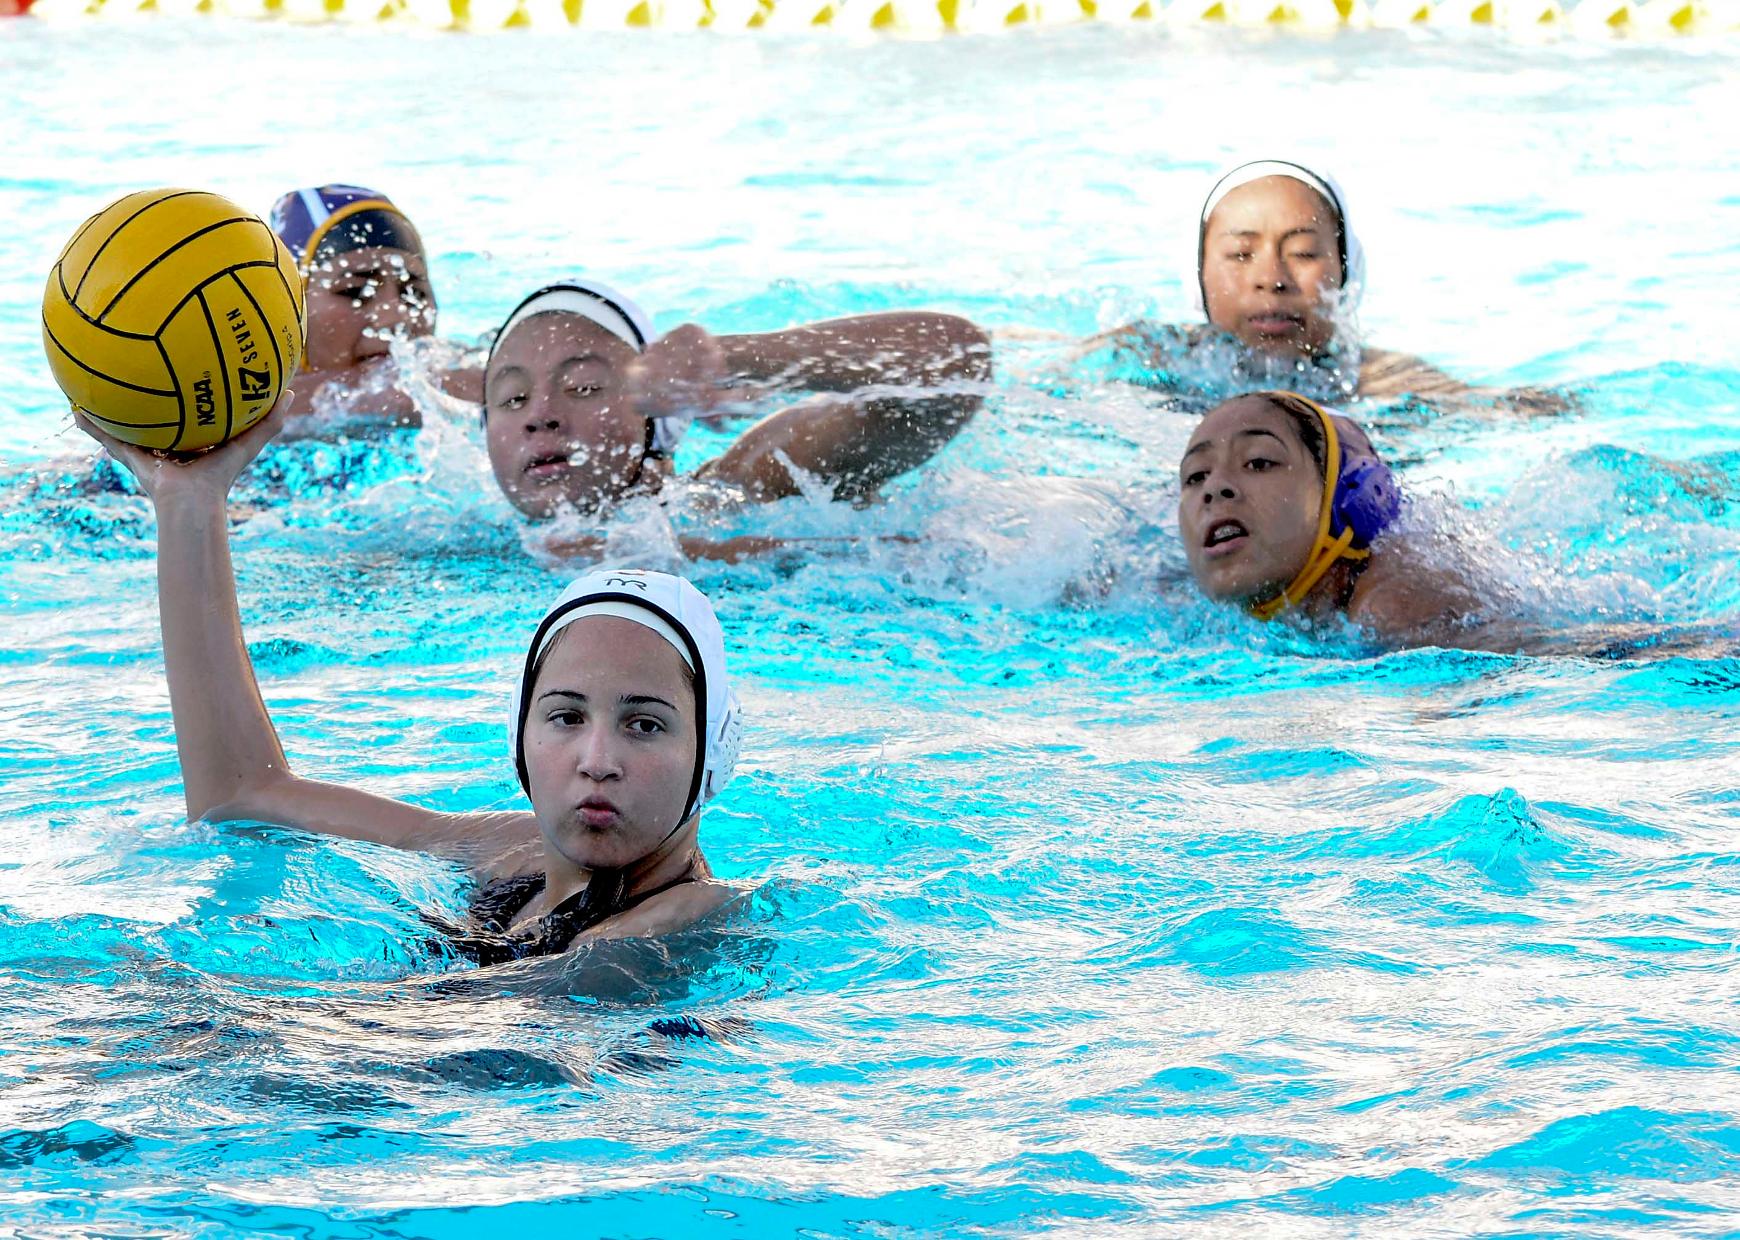 The East los Angeles college water polo team is on offense during a 17-1 win vs. crosstown rival LA Trade Tech on Oct. 5. (Photo by Tadzio Garcia)